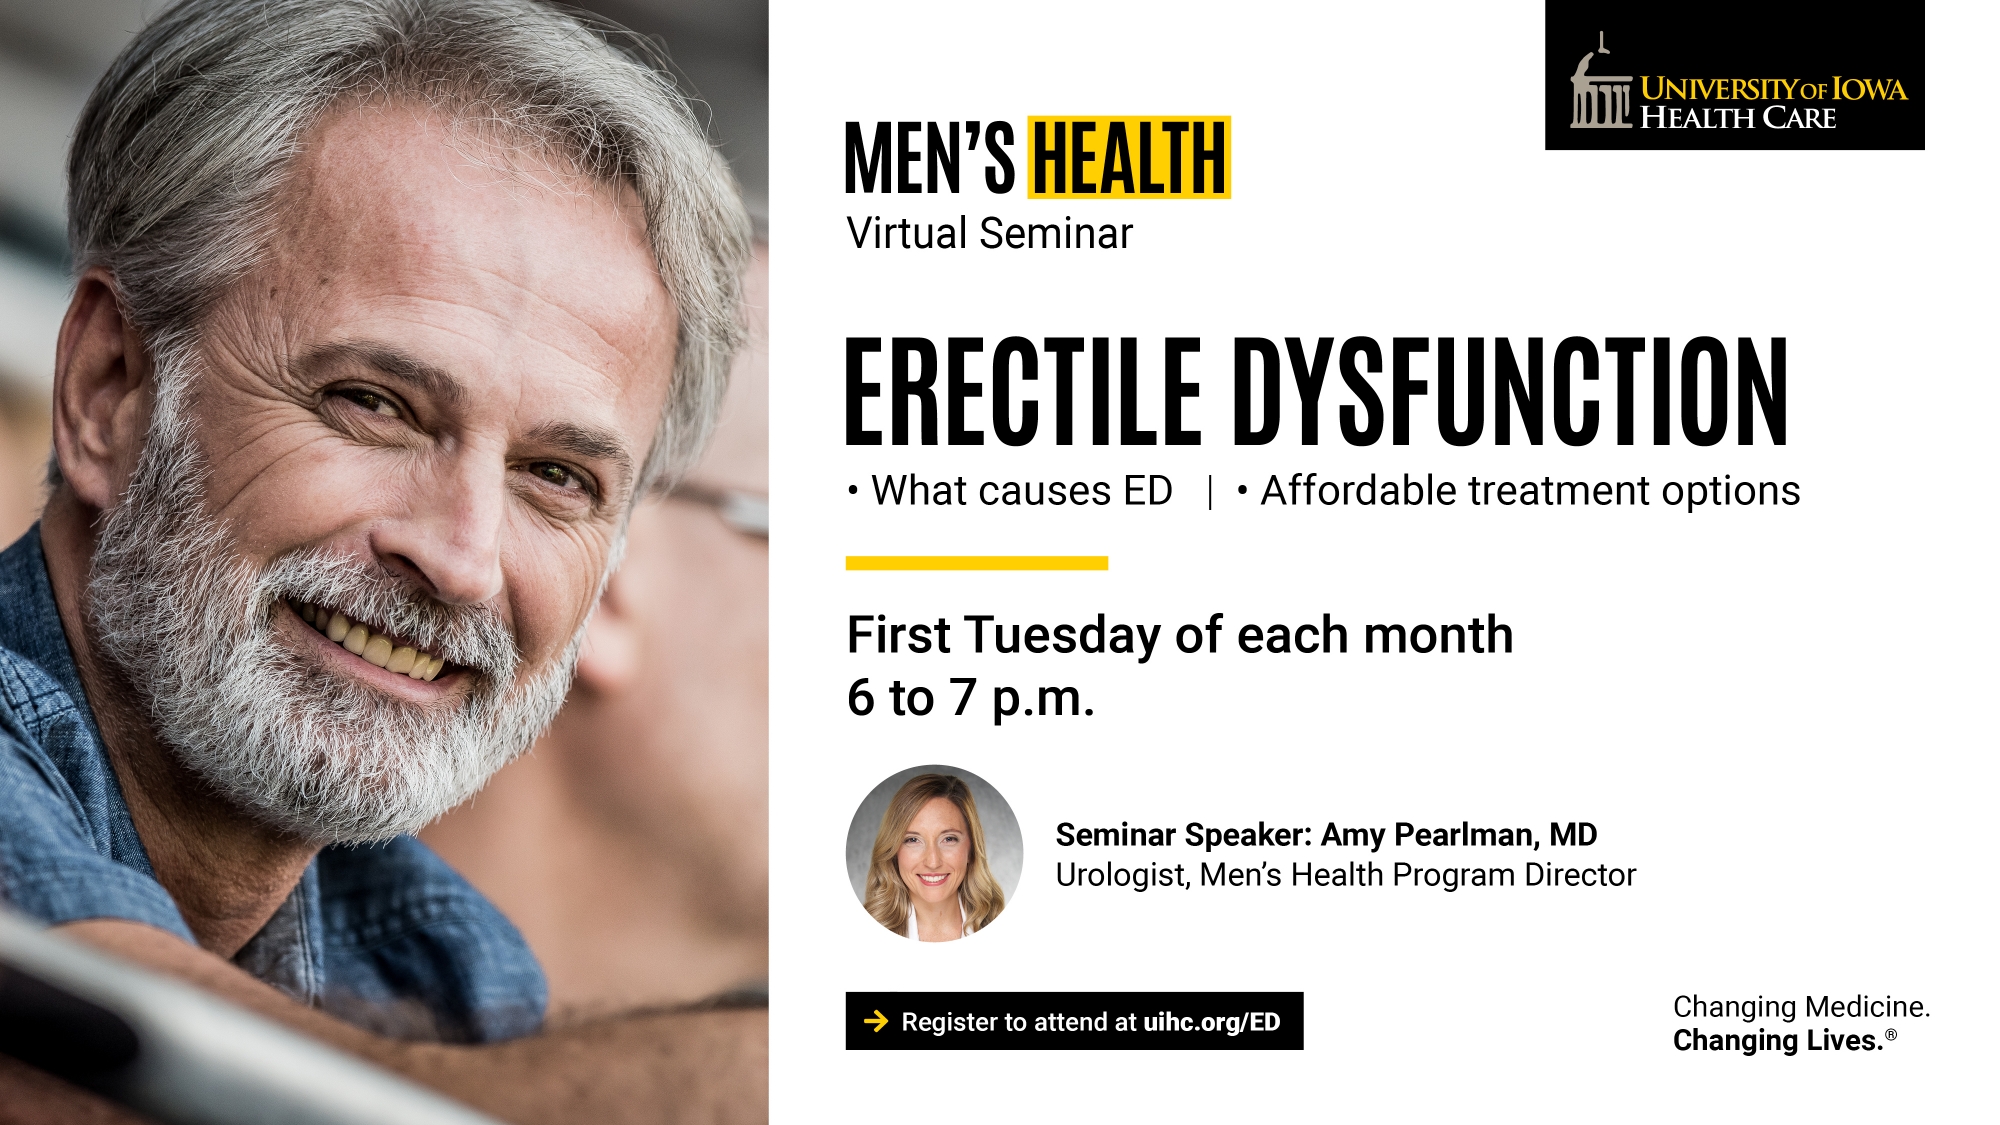 Erectile Dysfunction webinar 1st Tuesday each month 6-7 pm